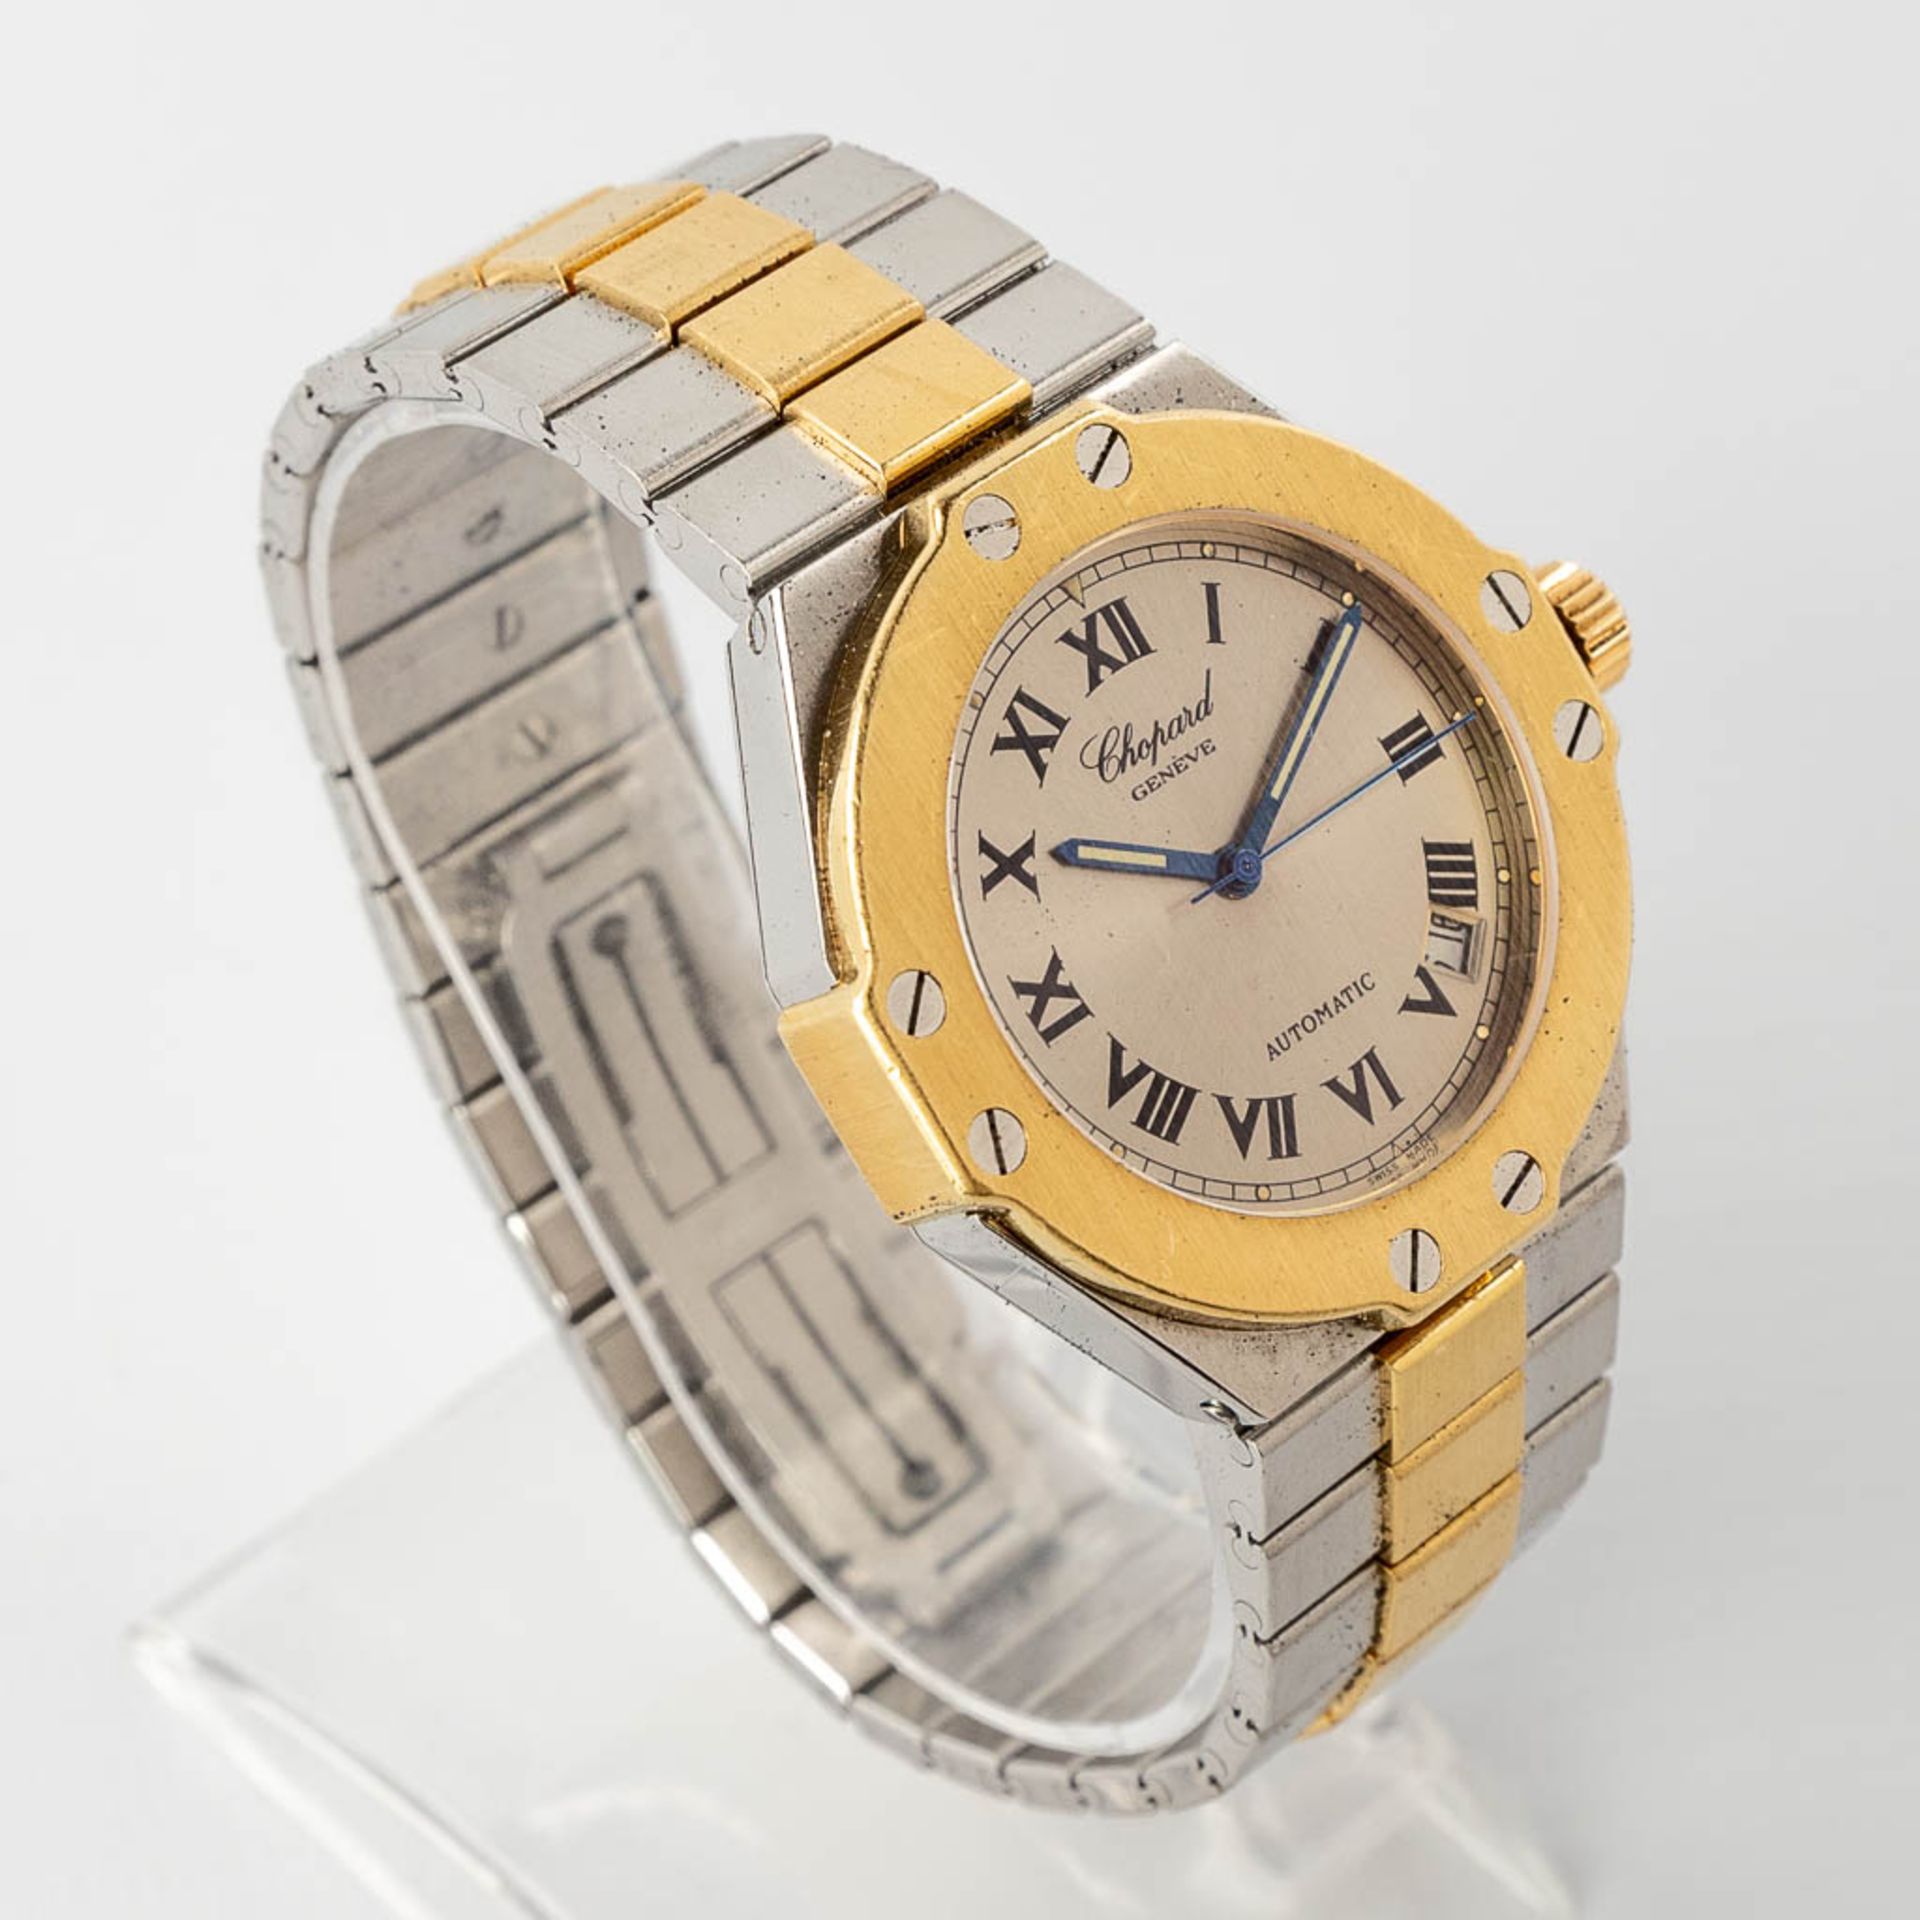 Chopard Saint Moritz, a men's wristwatch, 18kt yellow gold and steel. Box and papers. Reference 8300 - Image 6 of 16